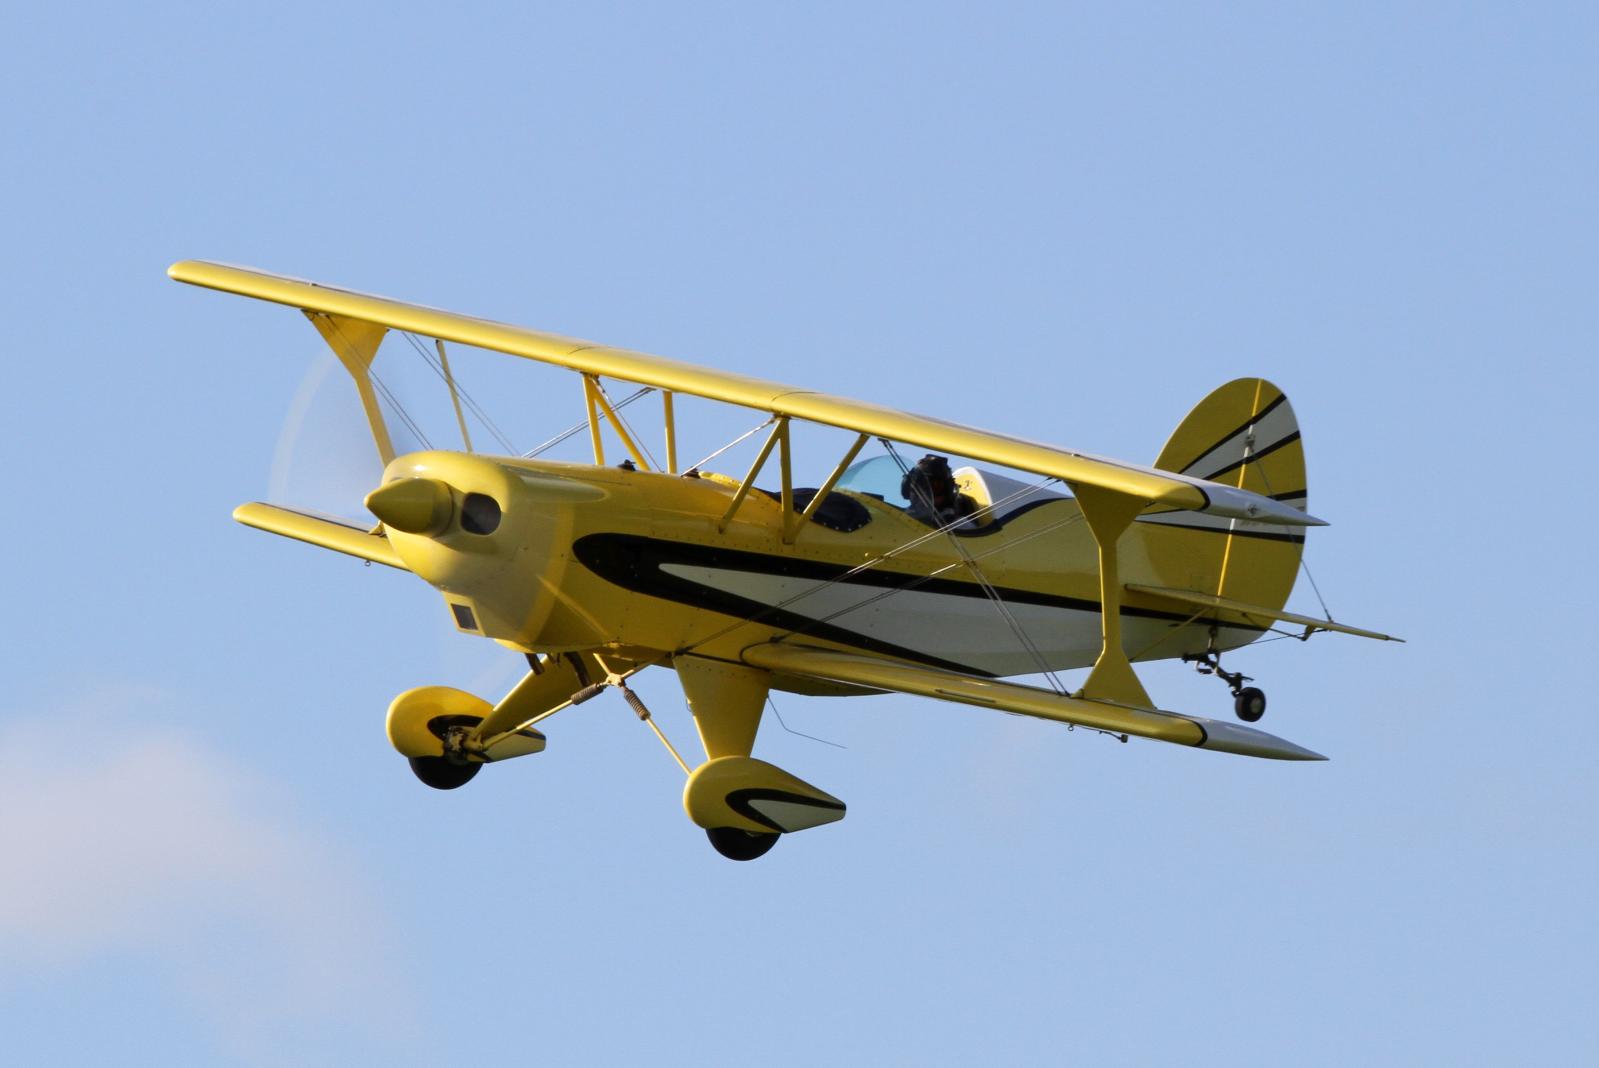 an antique biplane is flying in the sky